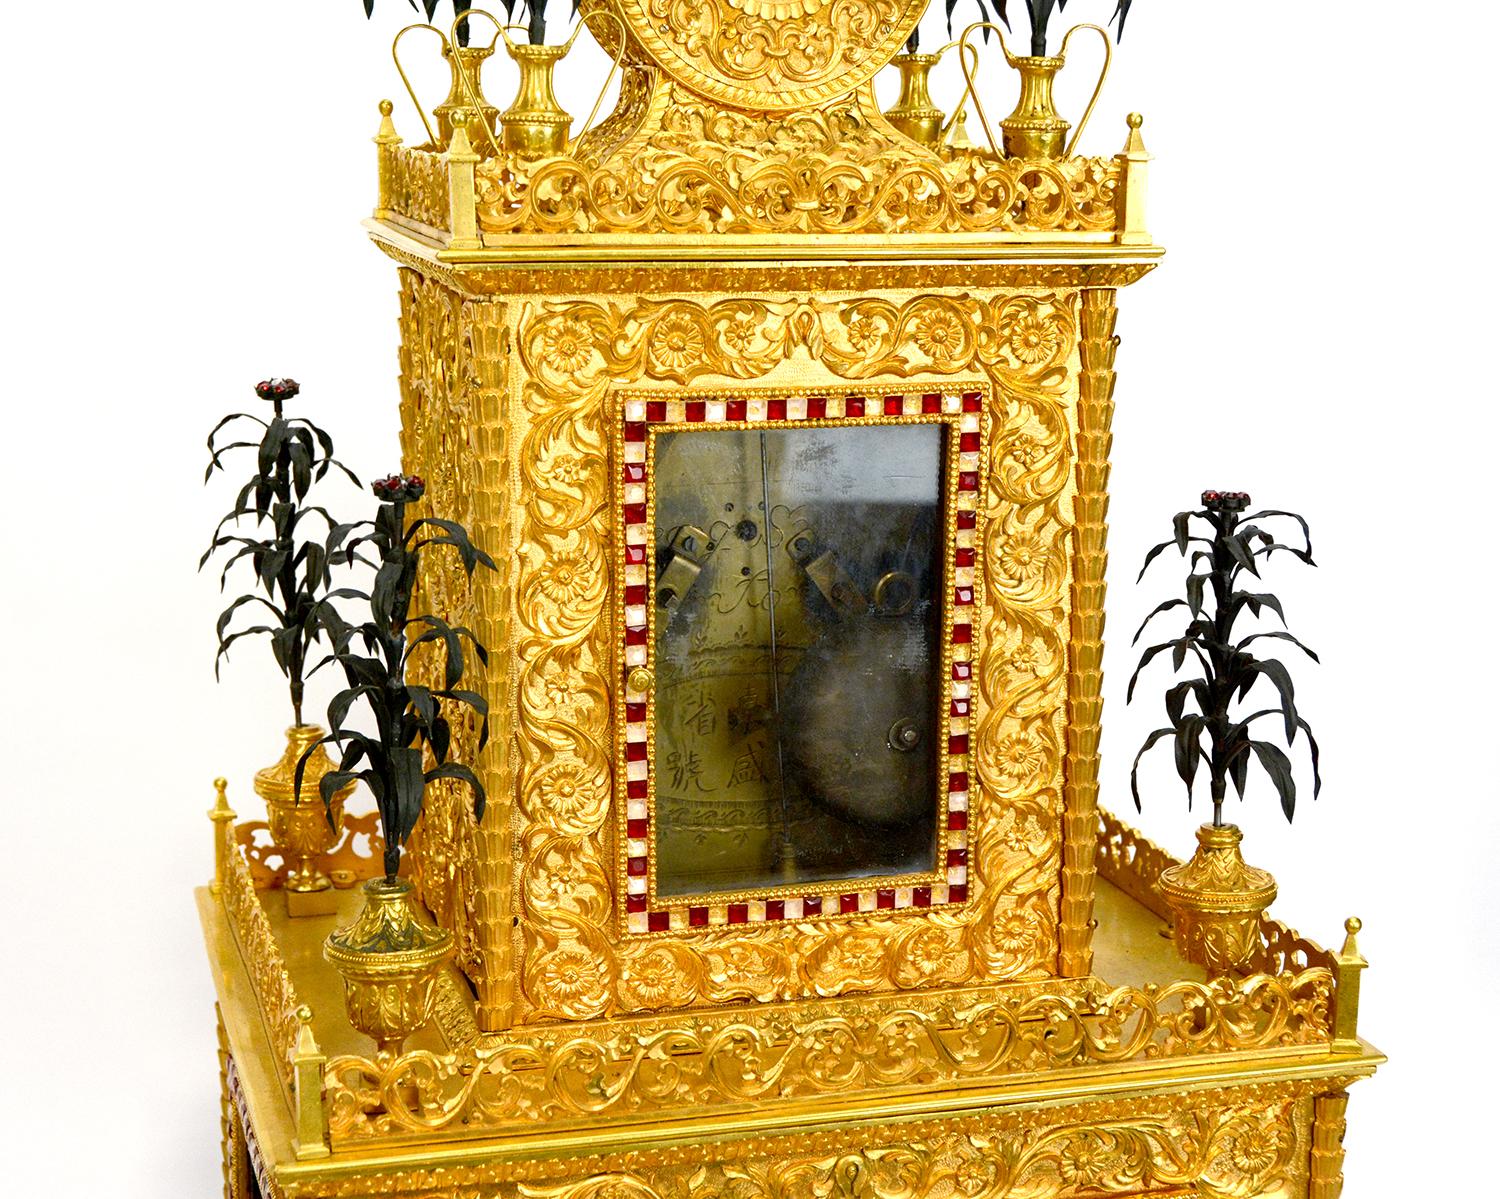 Massive Chinese Ormolu High Relief Gilt Bronze Automaton Musical Clock For Sale 9